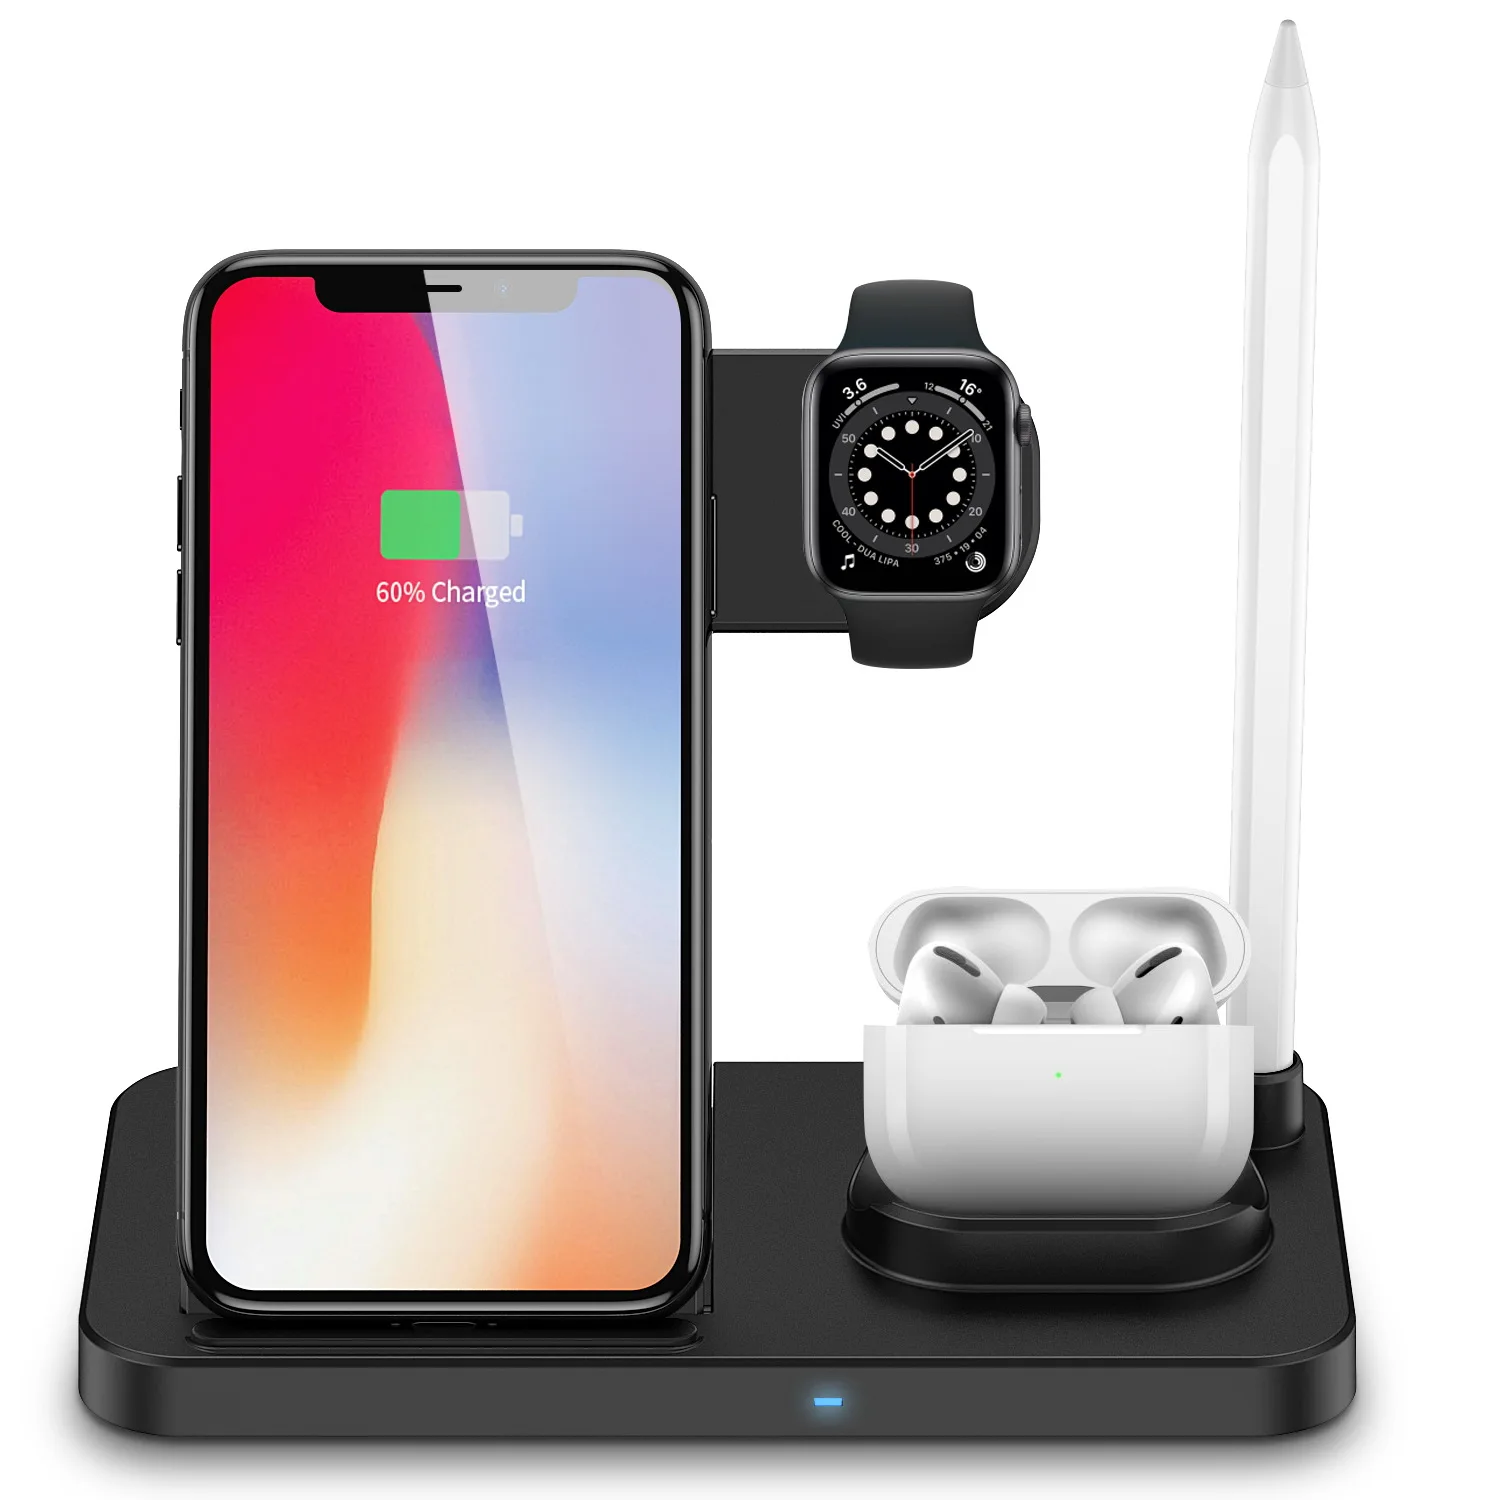 3 in 1 15W Fast Wireless Charger Charging Dock Station For iPhone 8/11/XR For Samsung S8/S9/S10 AirPods 1/2/3 iWatch 1/2/3/4